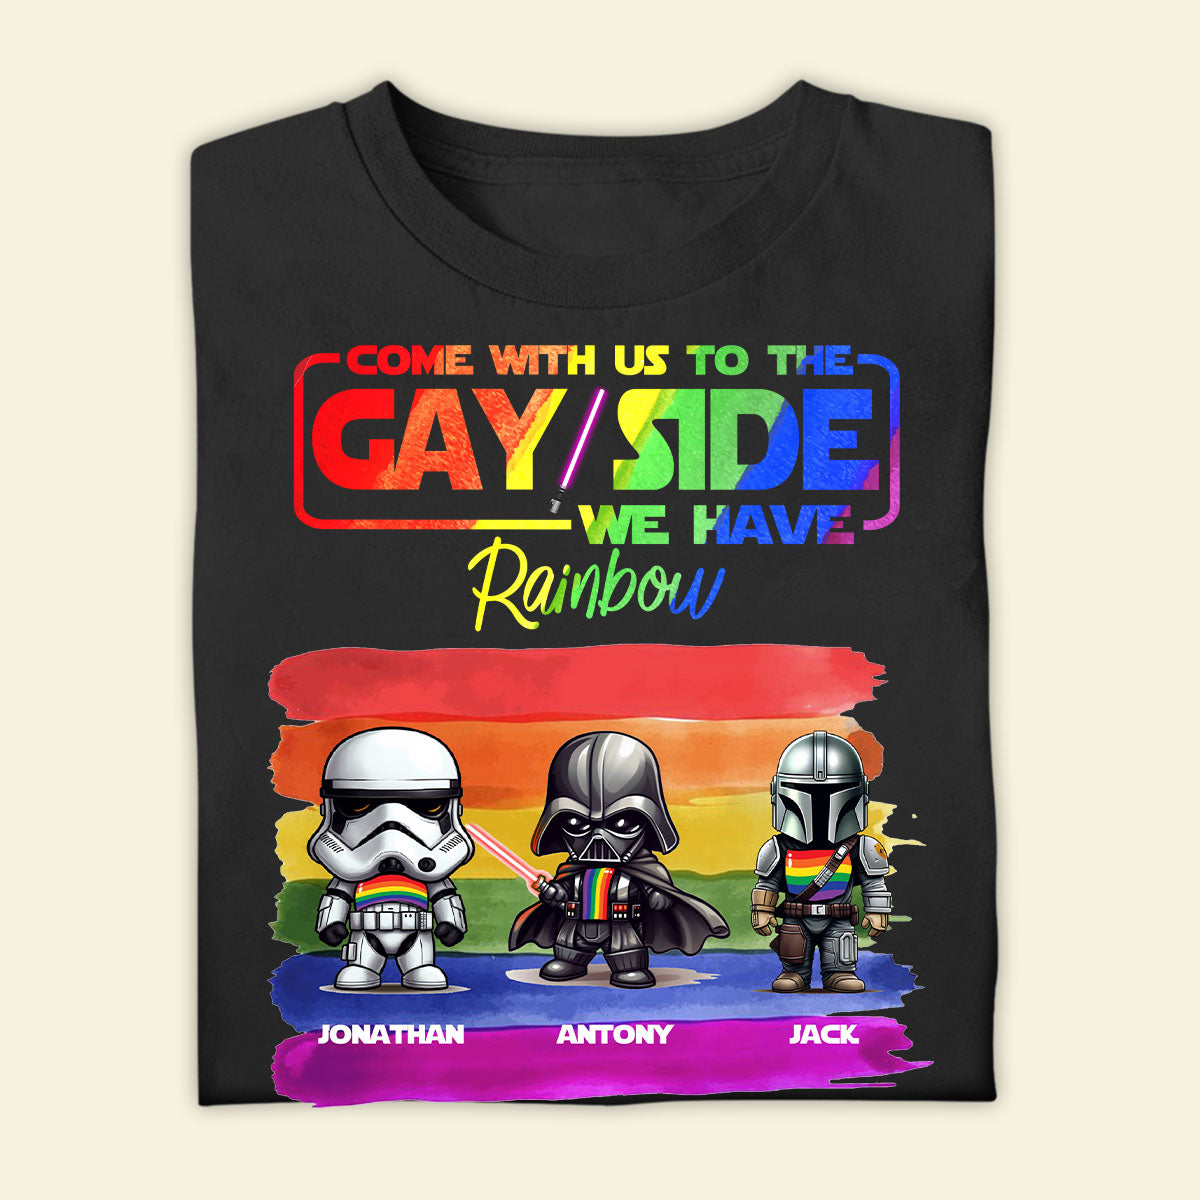 Funny Personalized LGBT T-Shirt - Come With Us To The Gay Side - Customized Apparel for Gay Lesbian Trans Bi - Gift for LGBT Month, Birthday, Anniversary